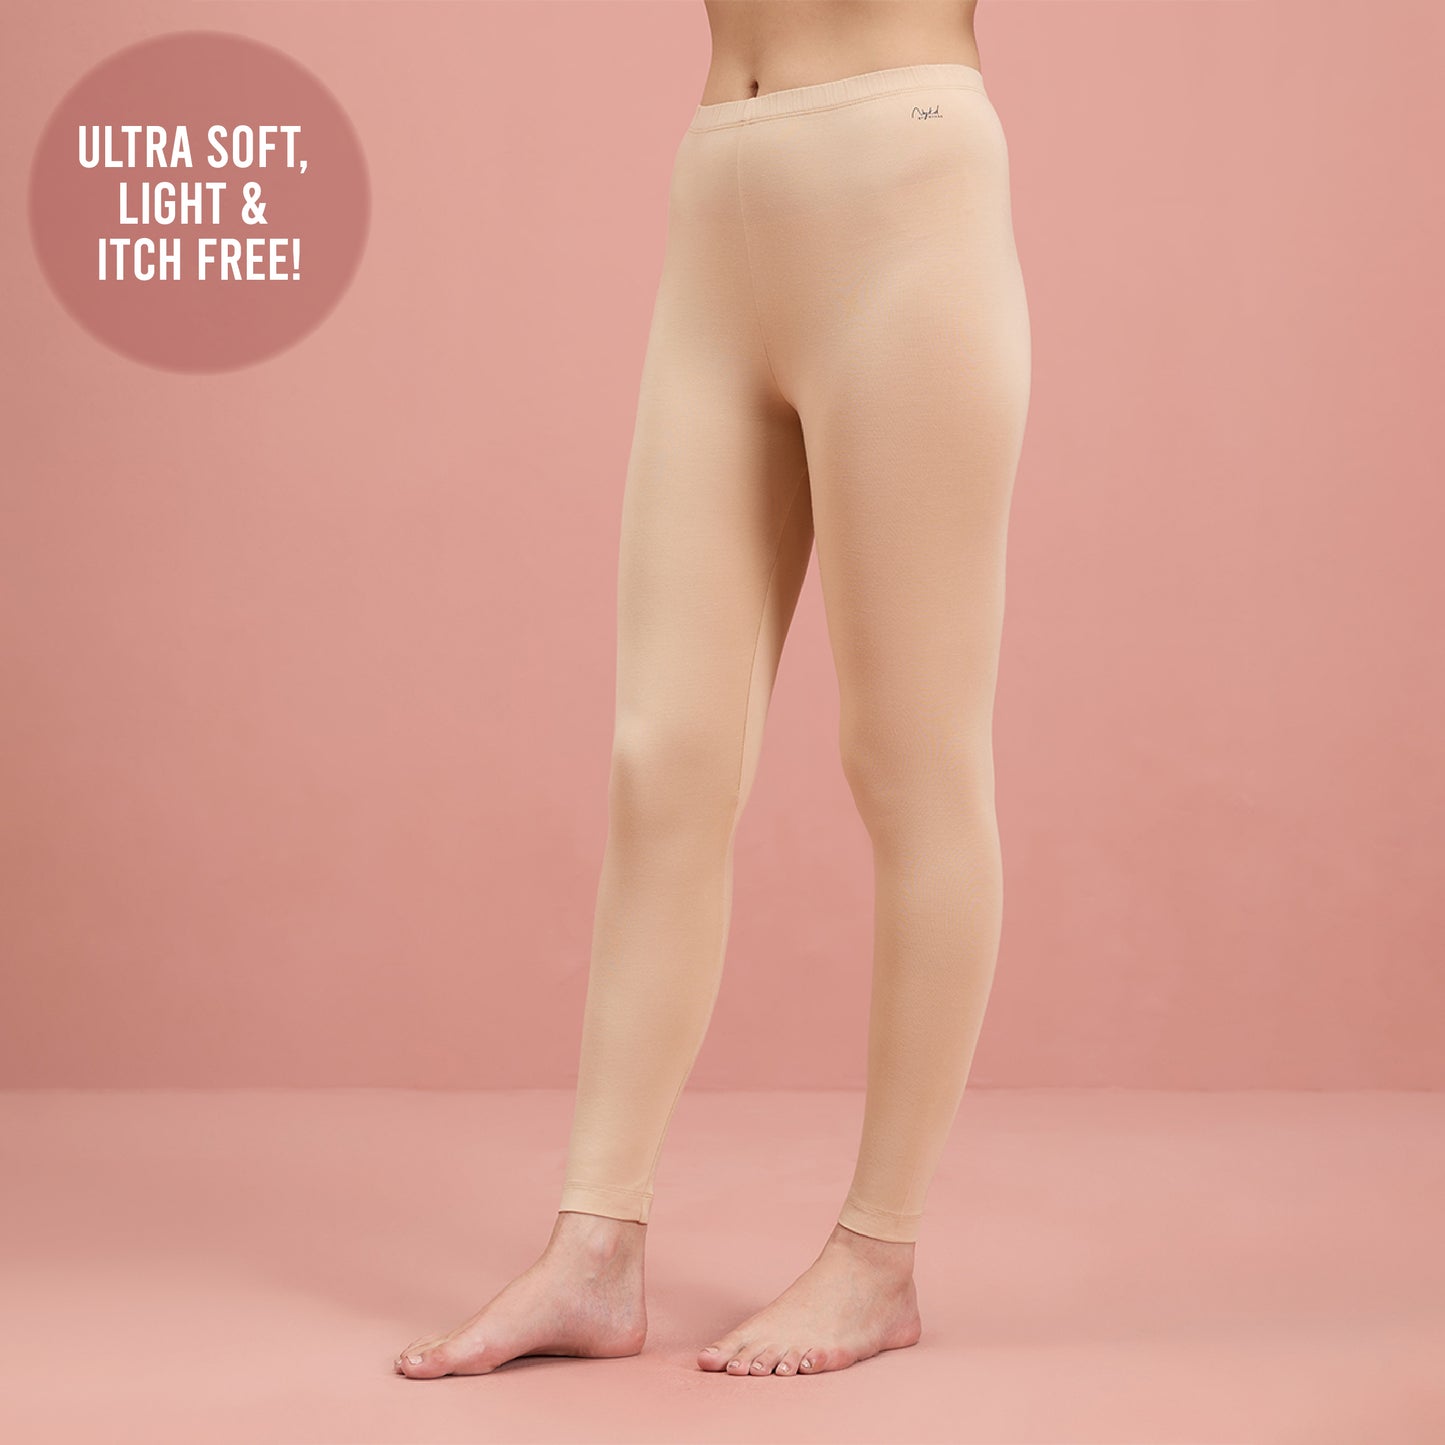 Ultra Light and Soft Thermal Leggings that stay hidden under clothes - NYOE06 Nude